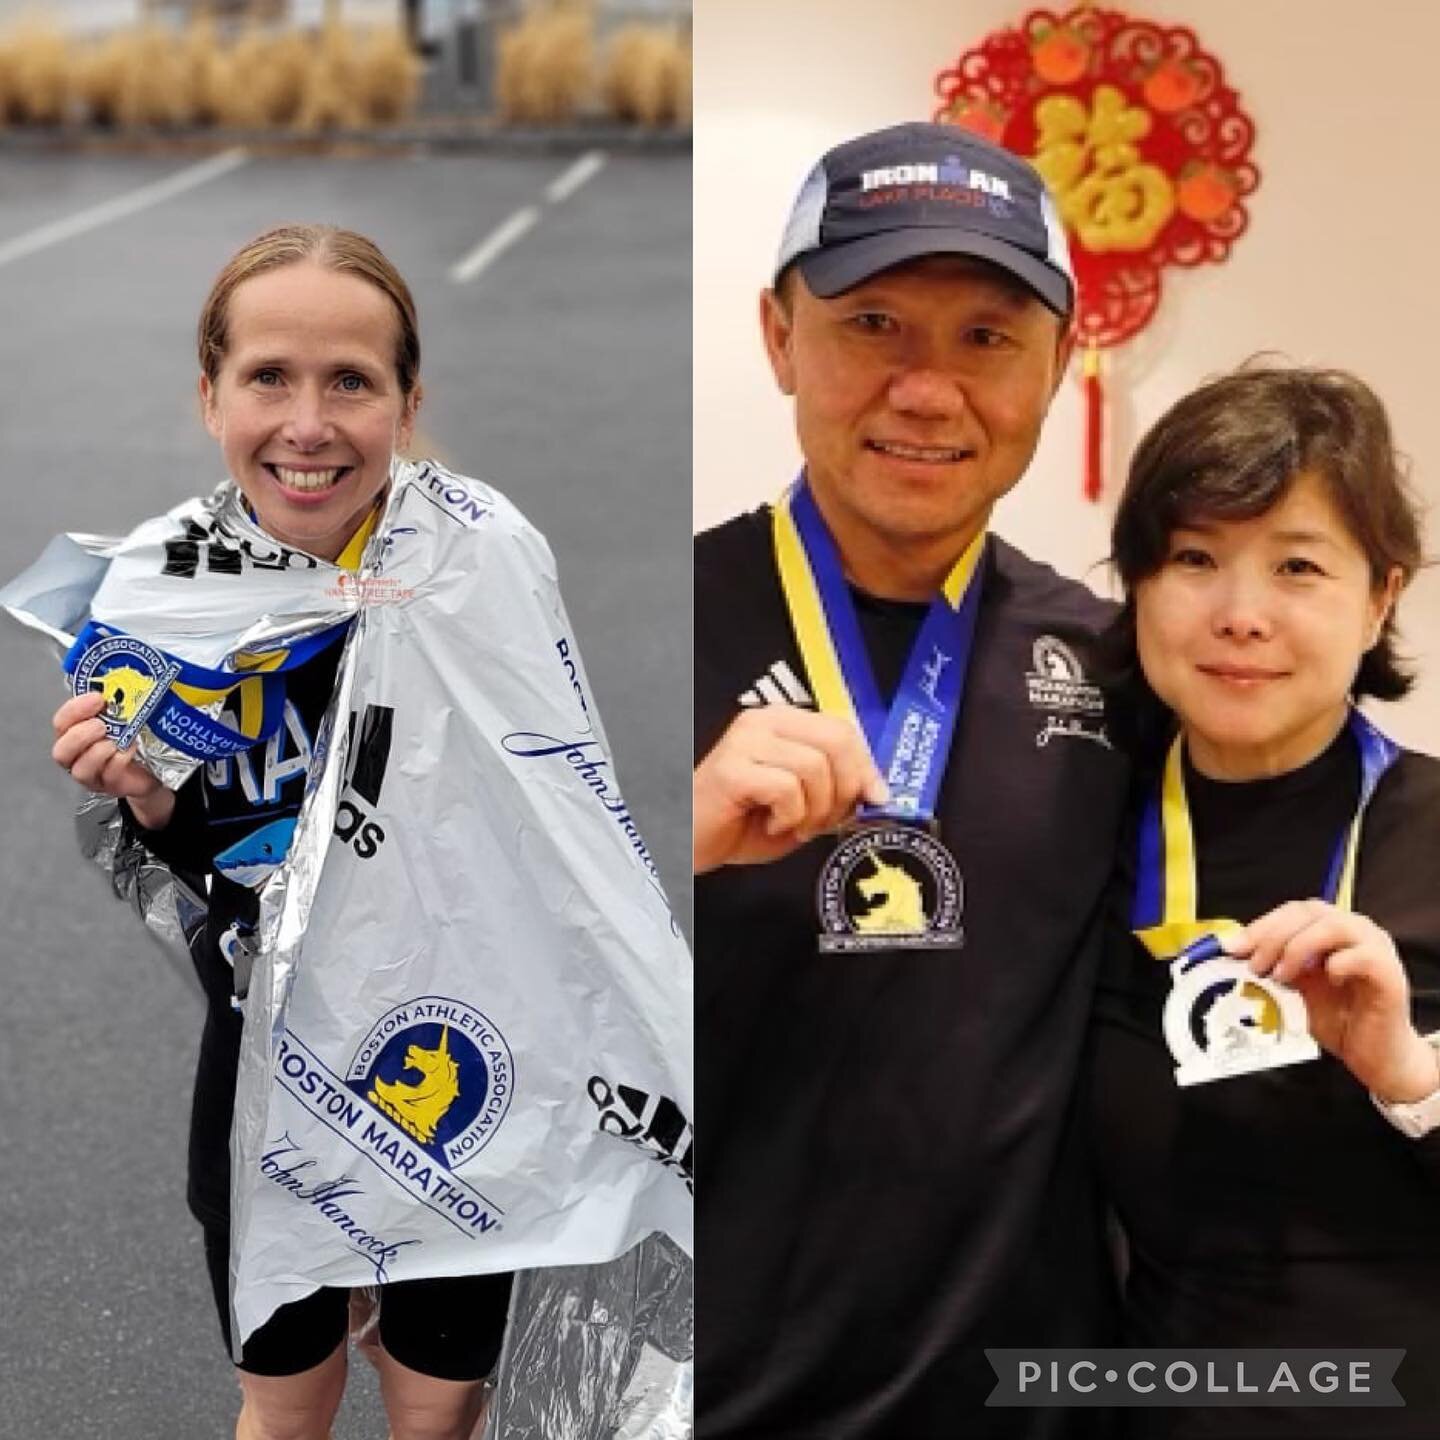 Congratulations to our Mama🦈, Emily Chester &amp; birthday boy🥳, James Zhao, who CRUSHED the 127th Boston Marathon on Monday!💛🦄💙 Emily was able to run another BQ time, making this her 6th BQ (no big deal)! Her first BQ was in 2019 but was unable